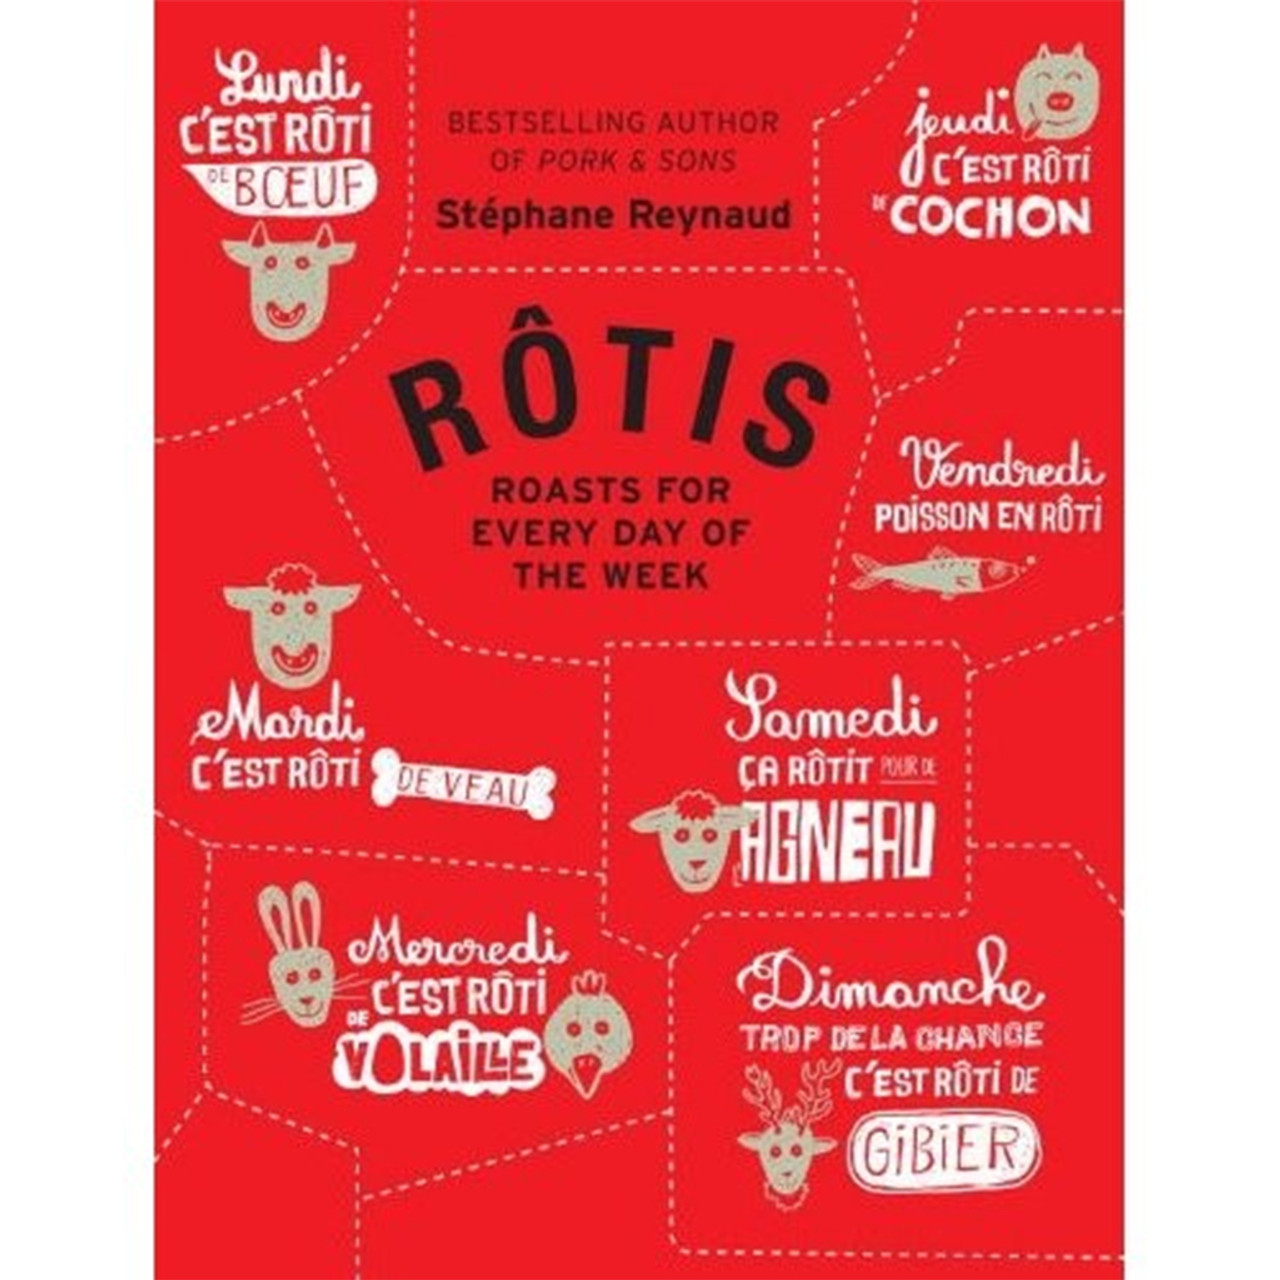 Rotis: Roasts for Every Day of the Week by Stephane Reynaud